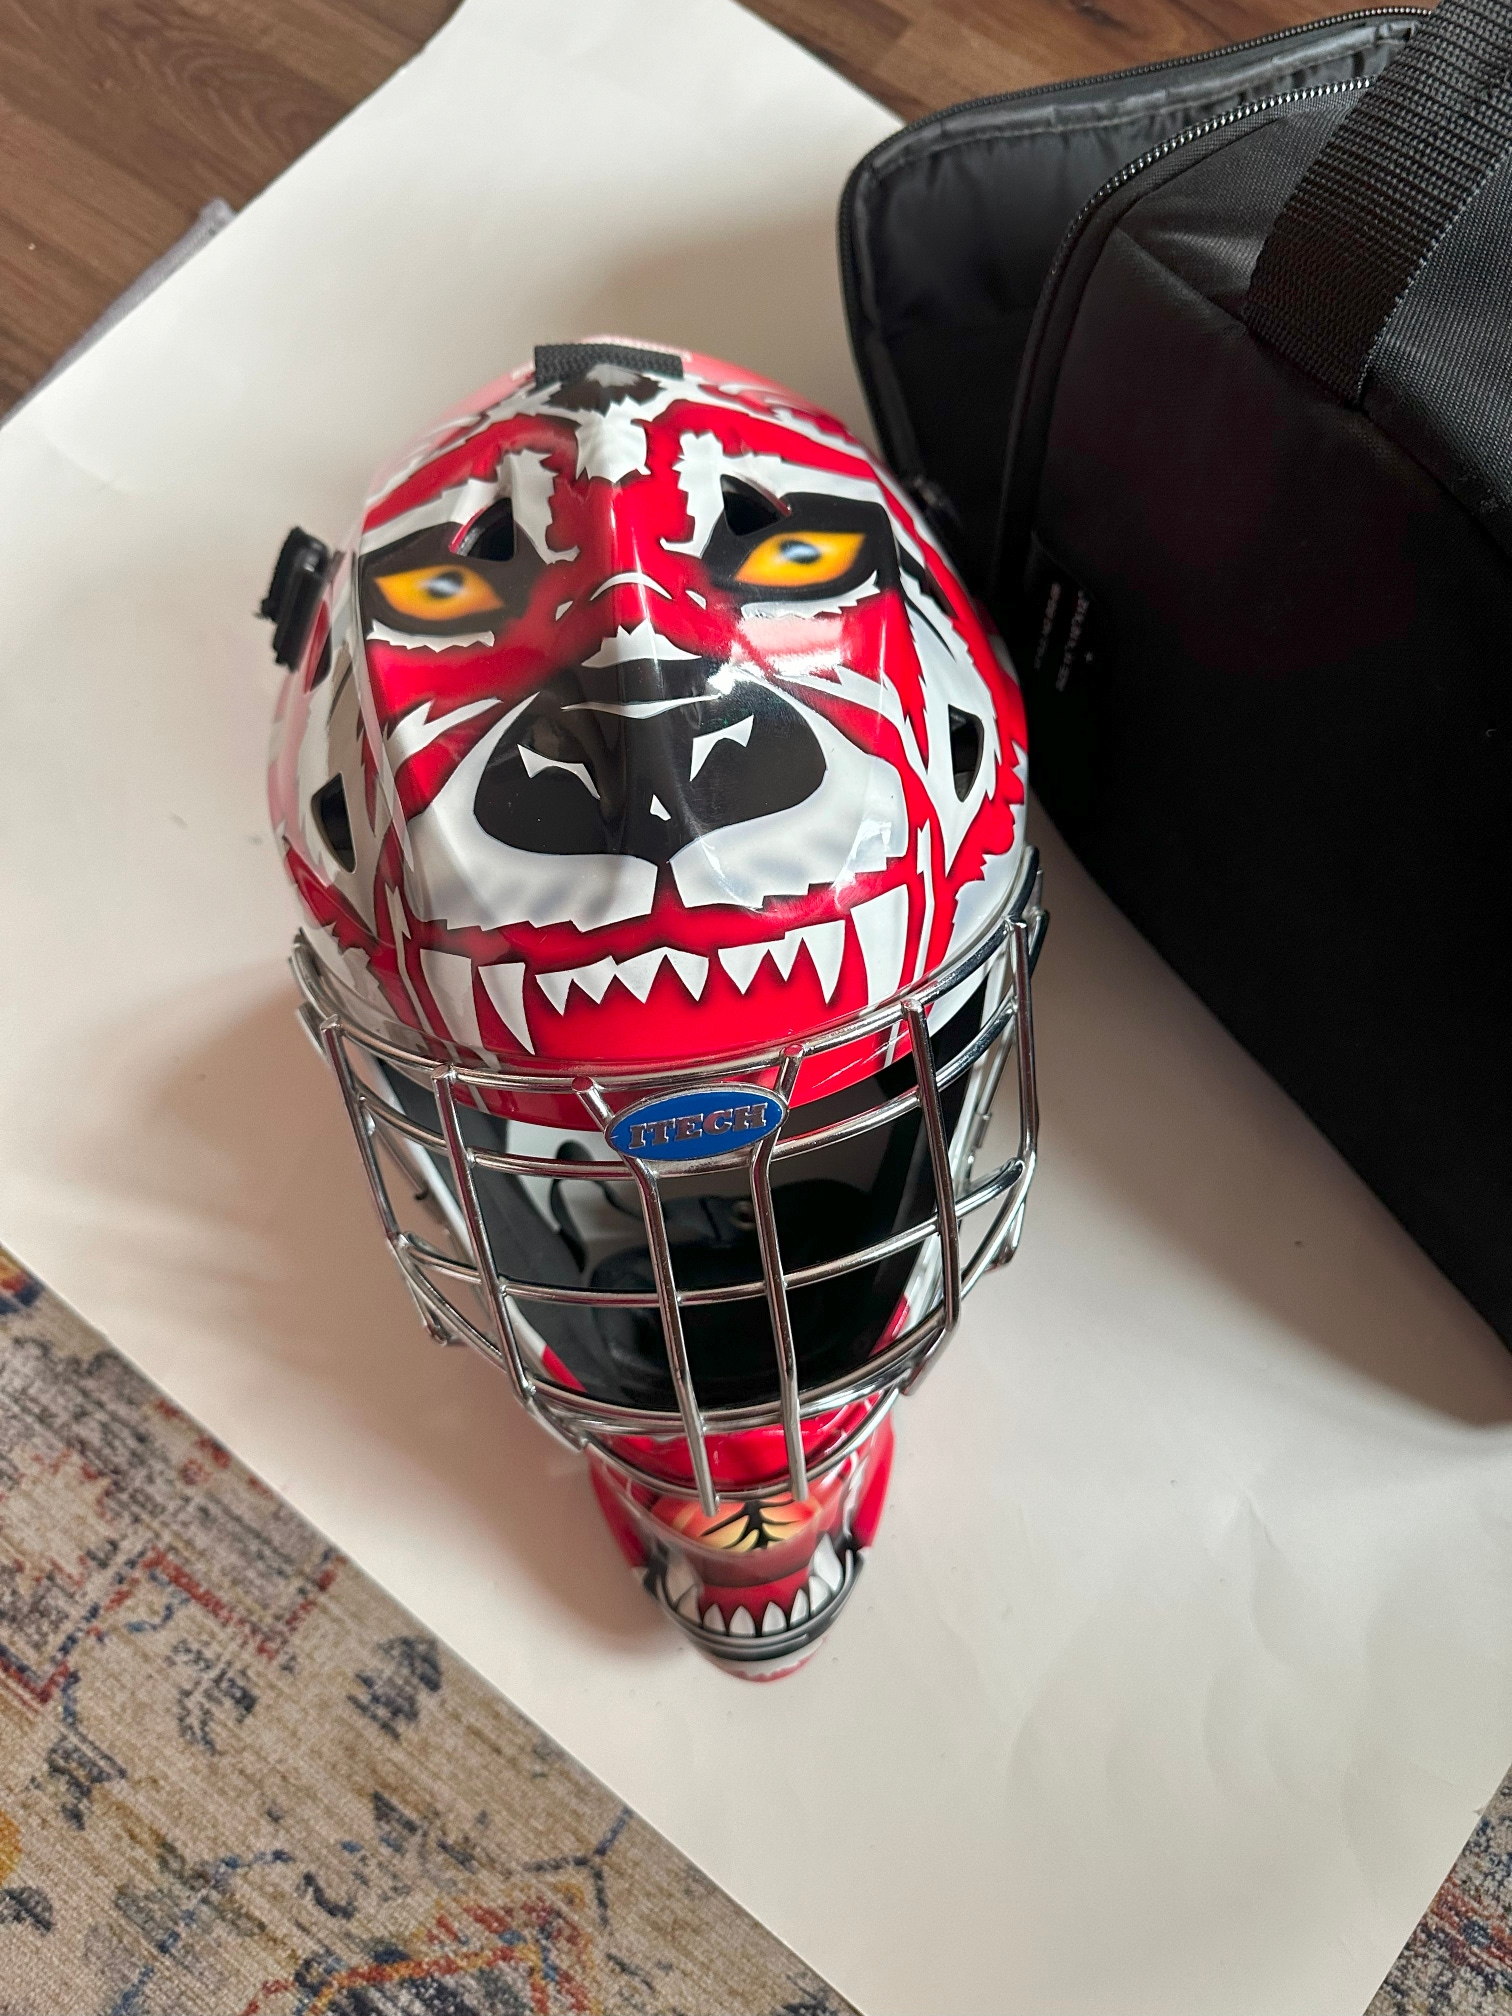 ITECH brand new ice hockey goalie mask with carrying case..